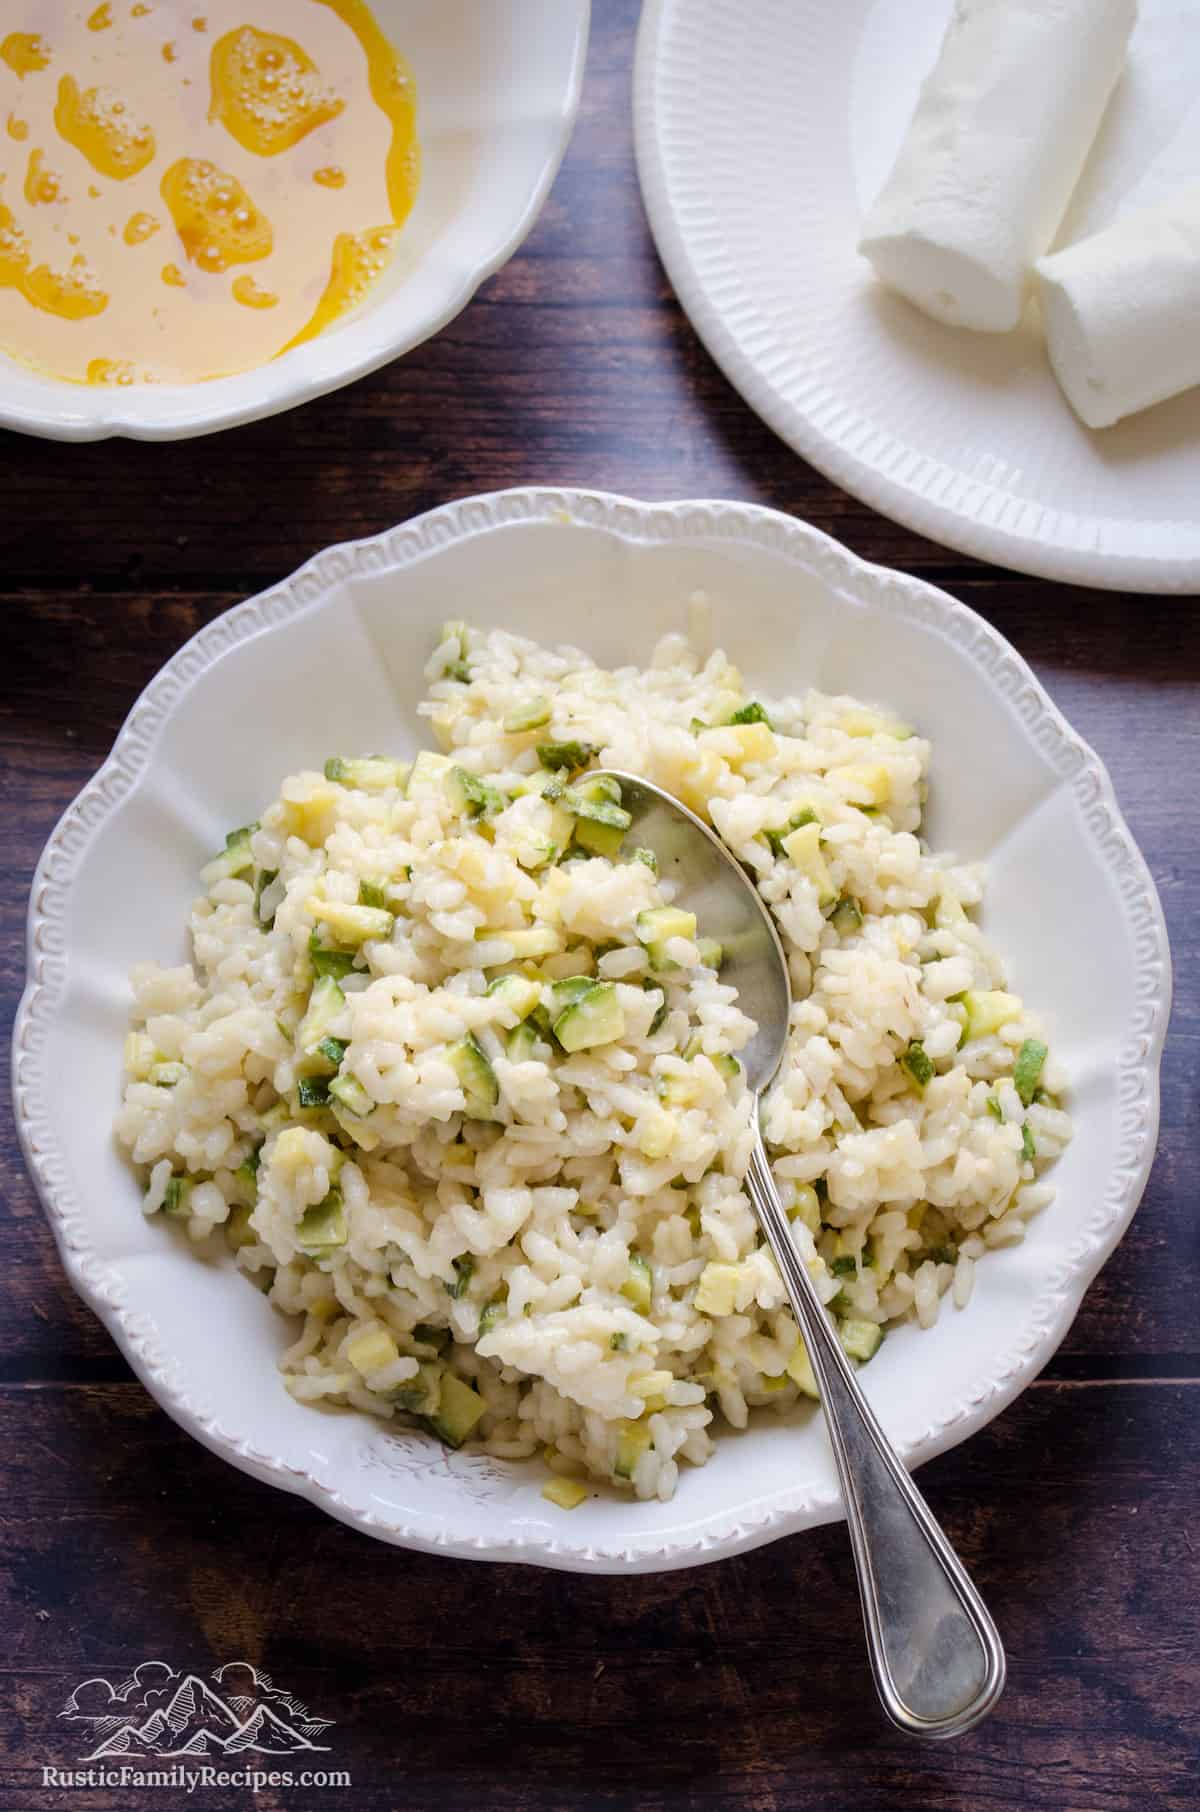 Cooked zucchini risotto rice in a white bowl with a spoon.